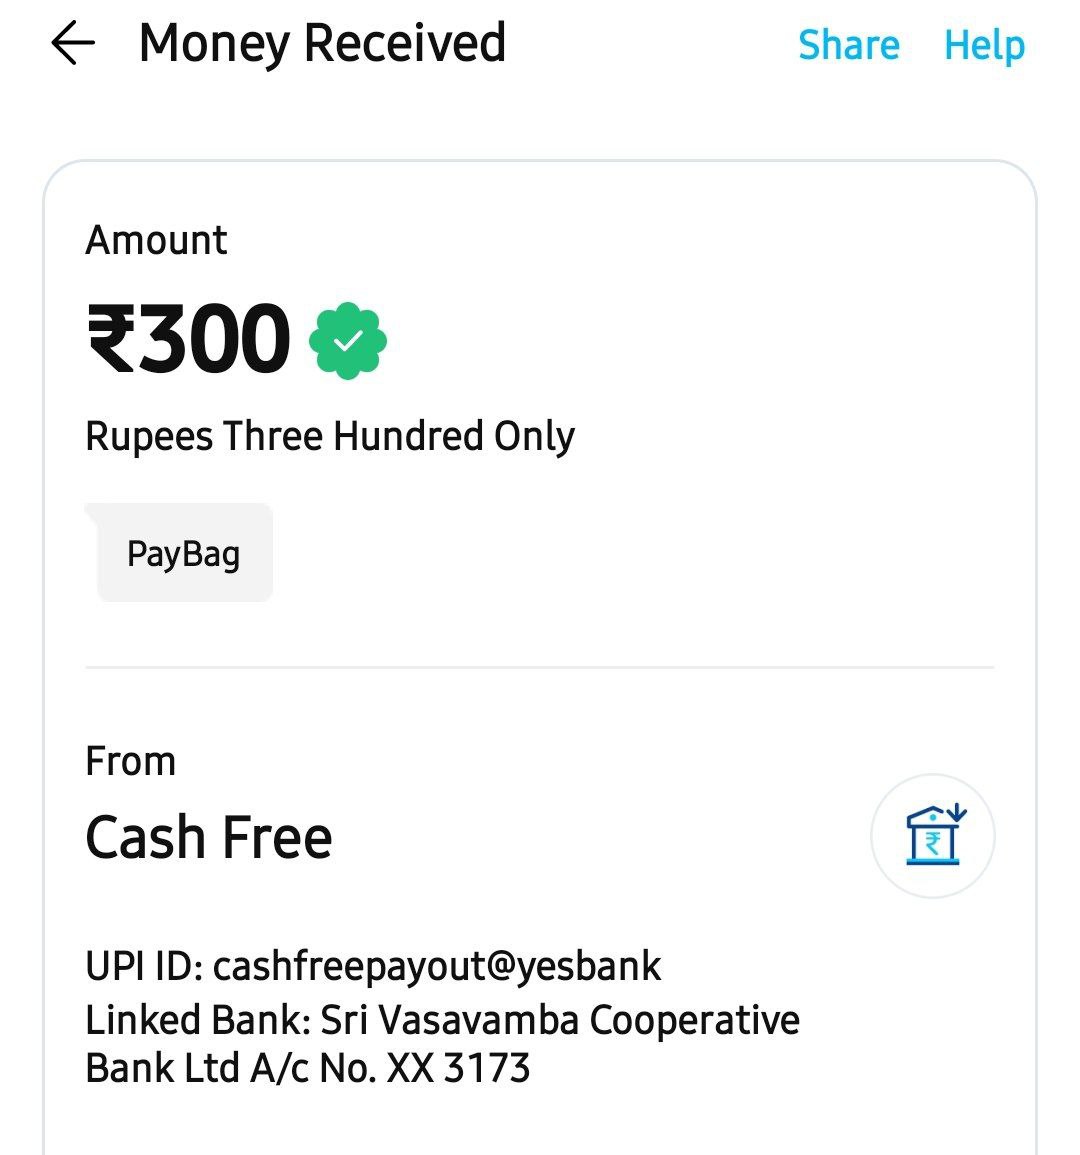 PayBag Website – Free ₹20 PayTM On Sign Up | ₹6/Refer [No OTP Required]